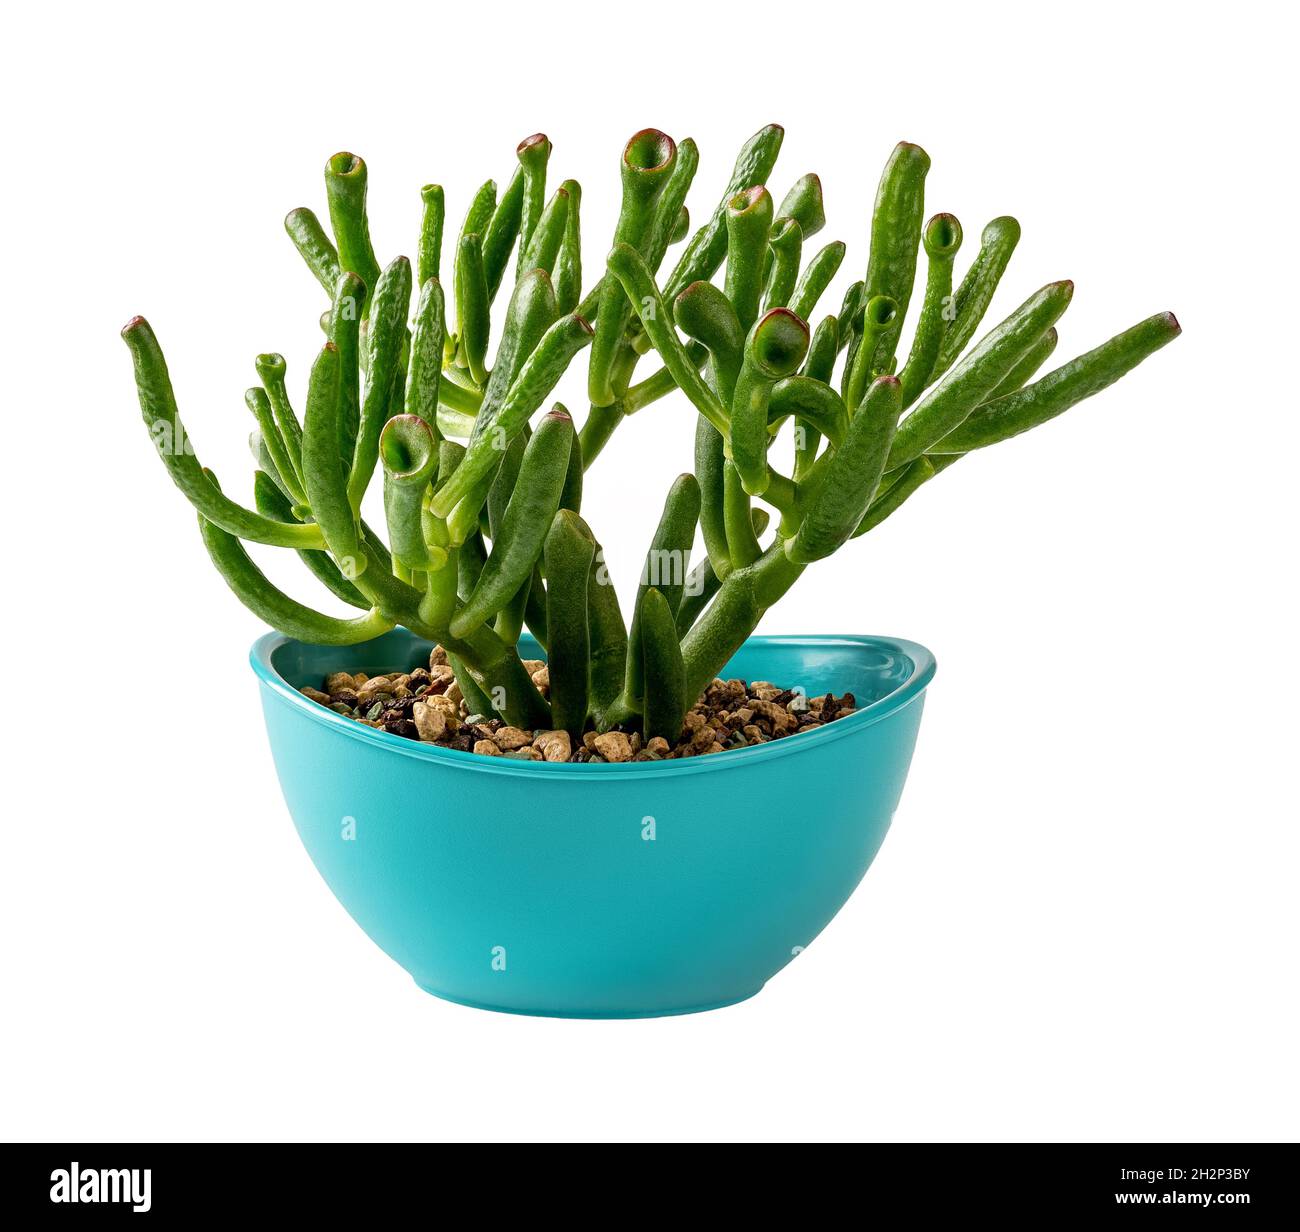 Potted crassula ovata Gollum Jade isolated on a white background. Unusual succulent with tubular leaves grows in an oval turquoise plastic flower pot. Stock Photo